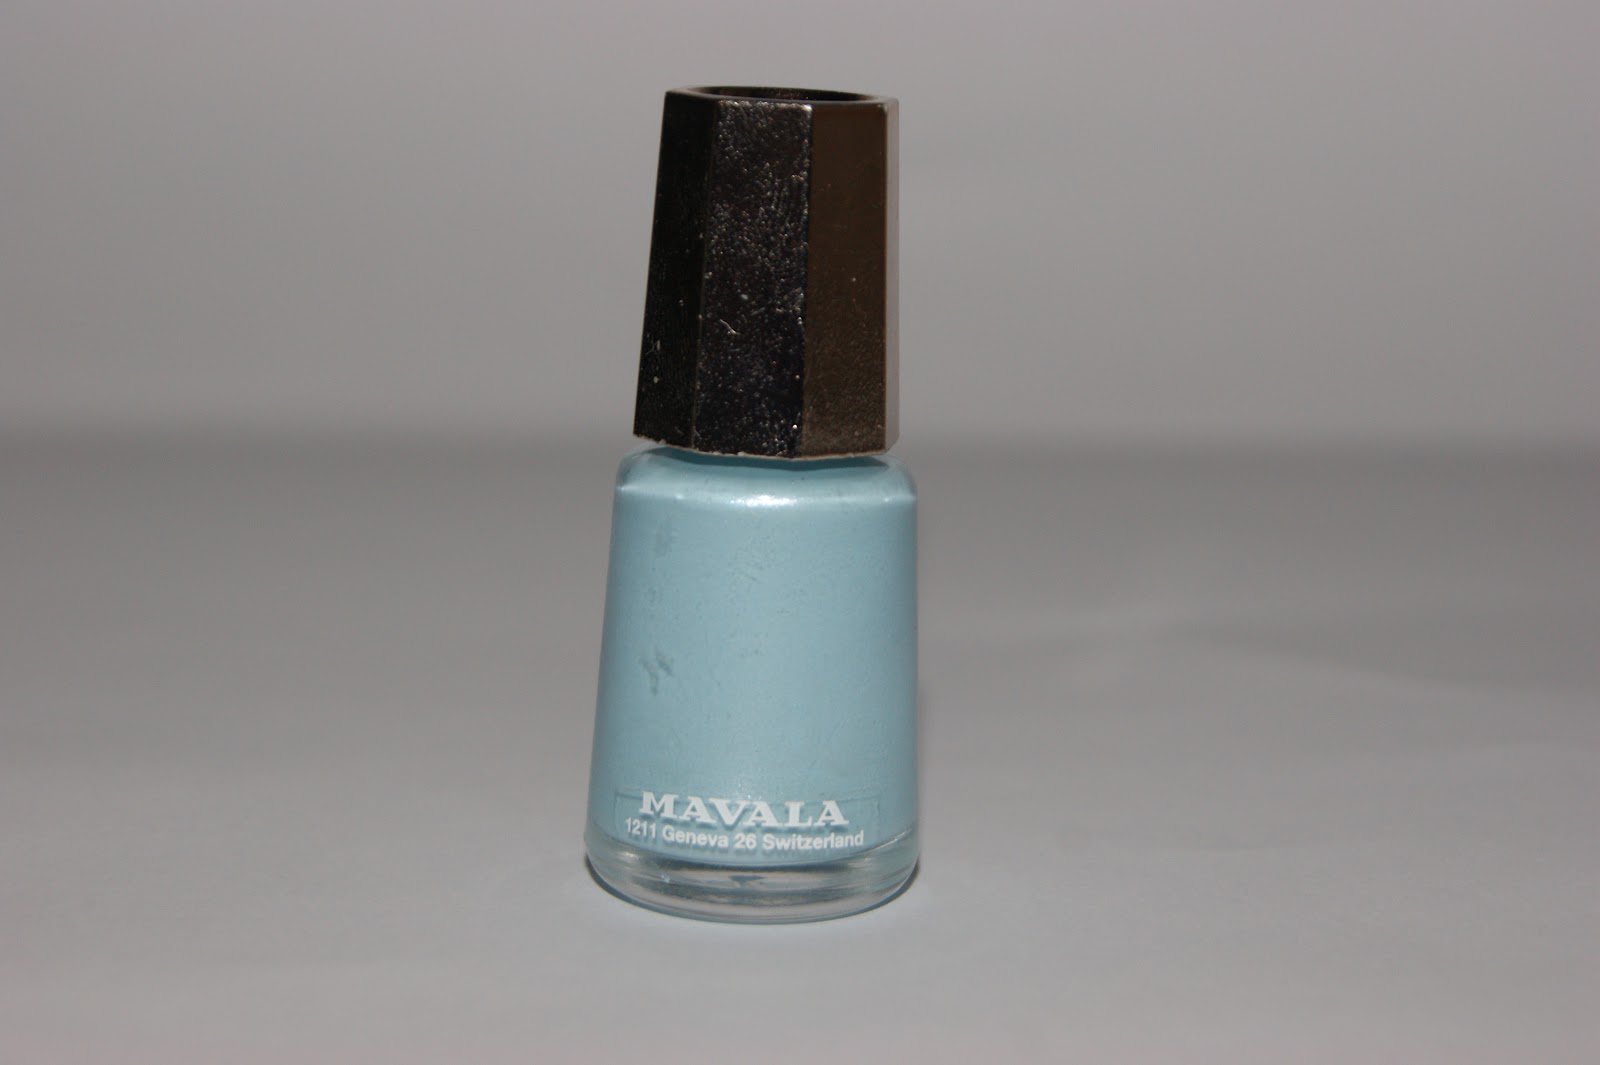 Mavala Candy Floss Nail Polish is one of 6 candied colours from the S/S